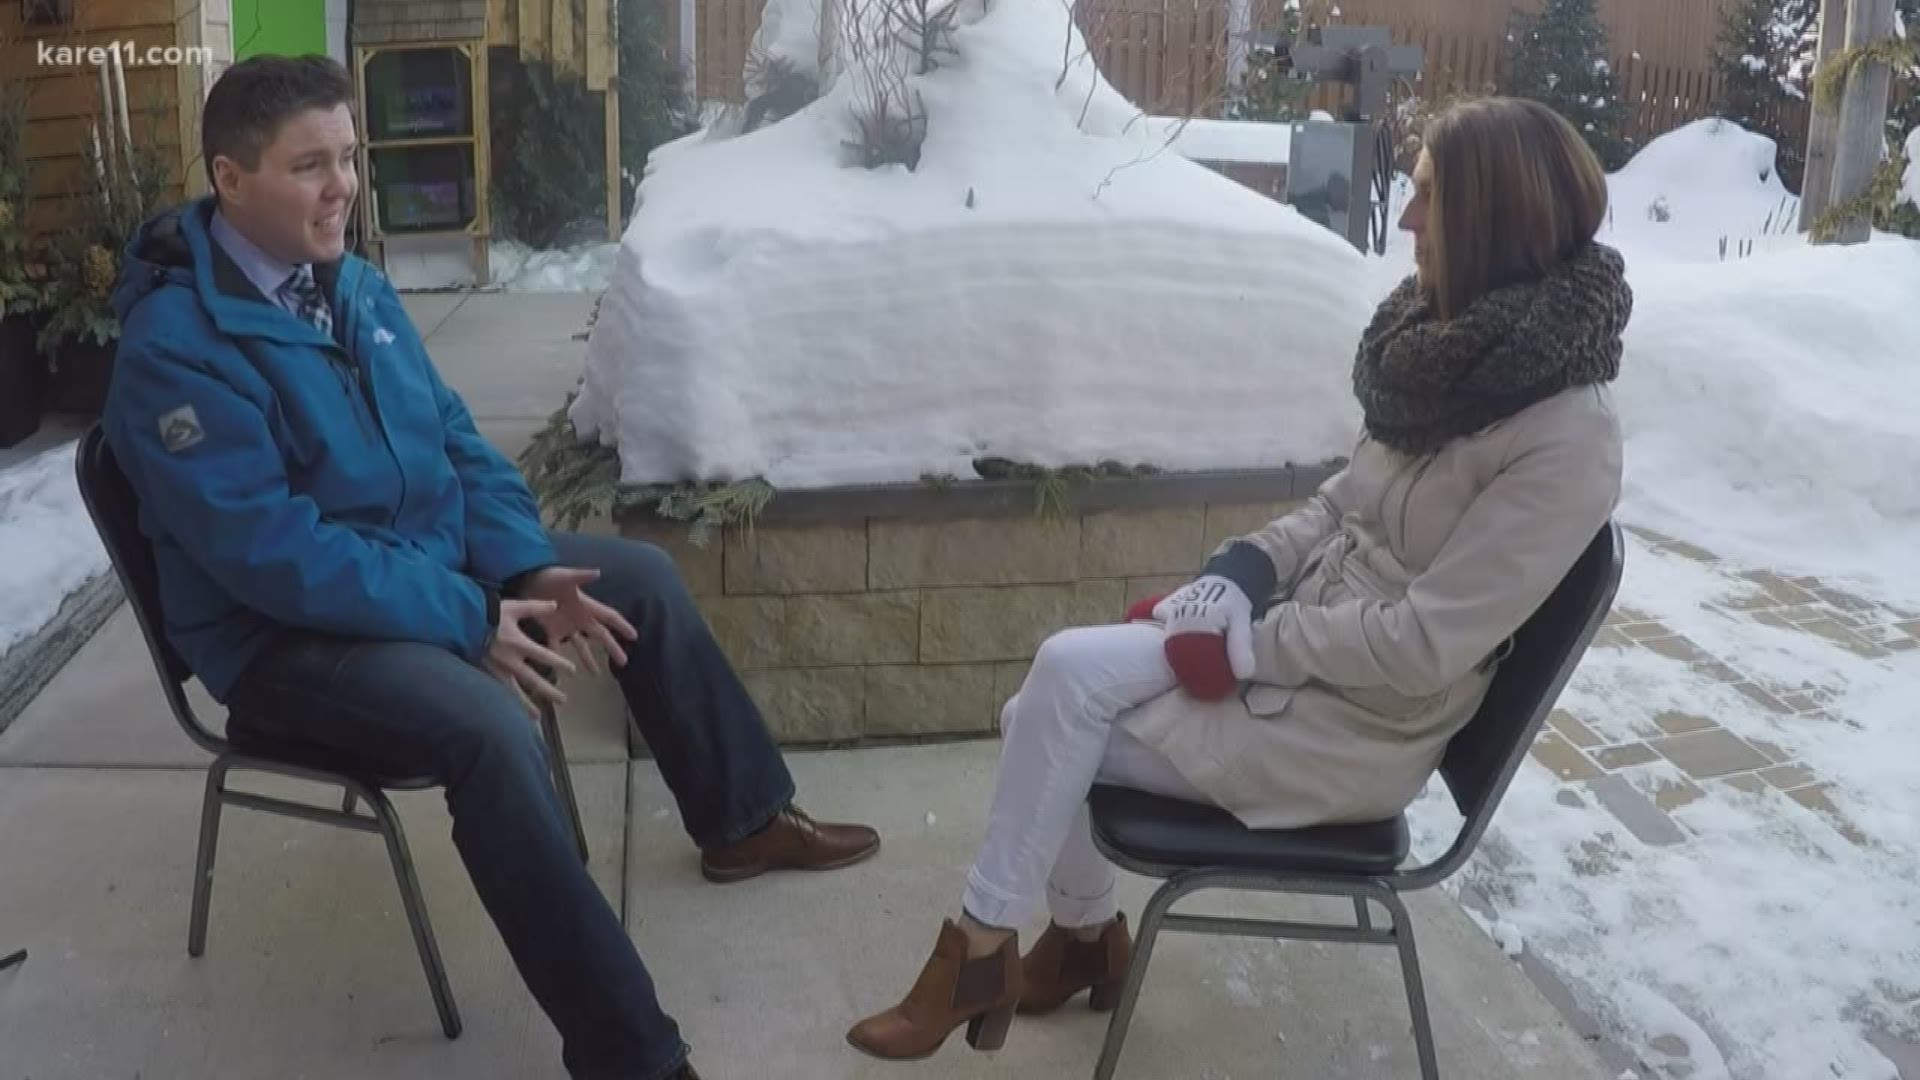 Q&A with KARE meteorologist Laura Betker about the heavy, thick snow coming this weekend.